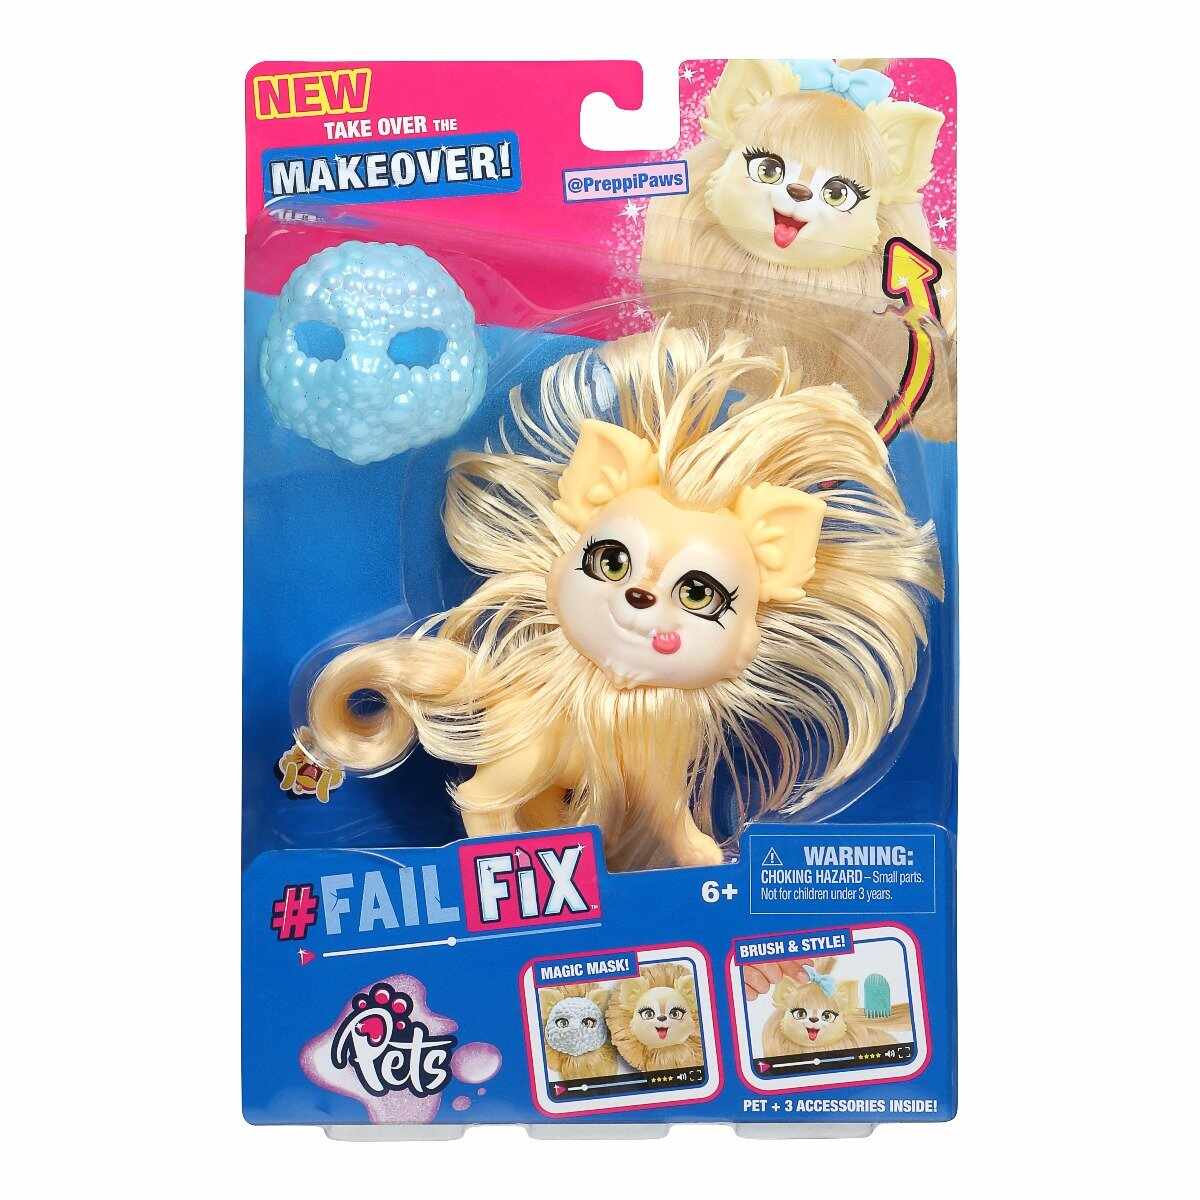 Papusa Fail Fix Makeover Pets S2, PreppiPaws